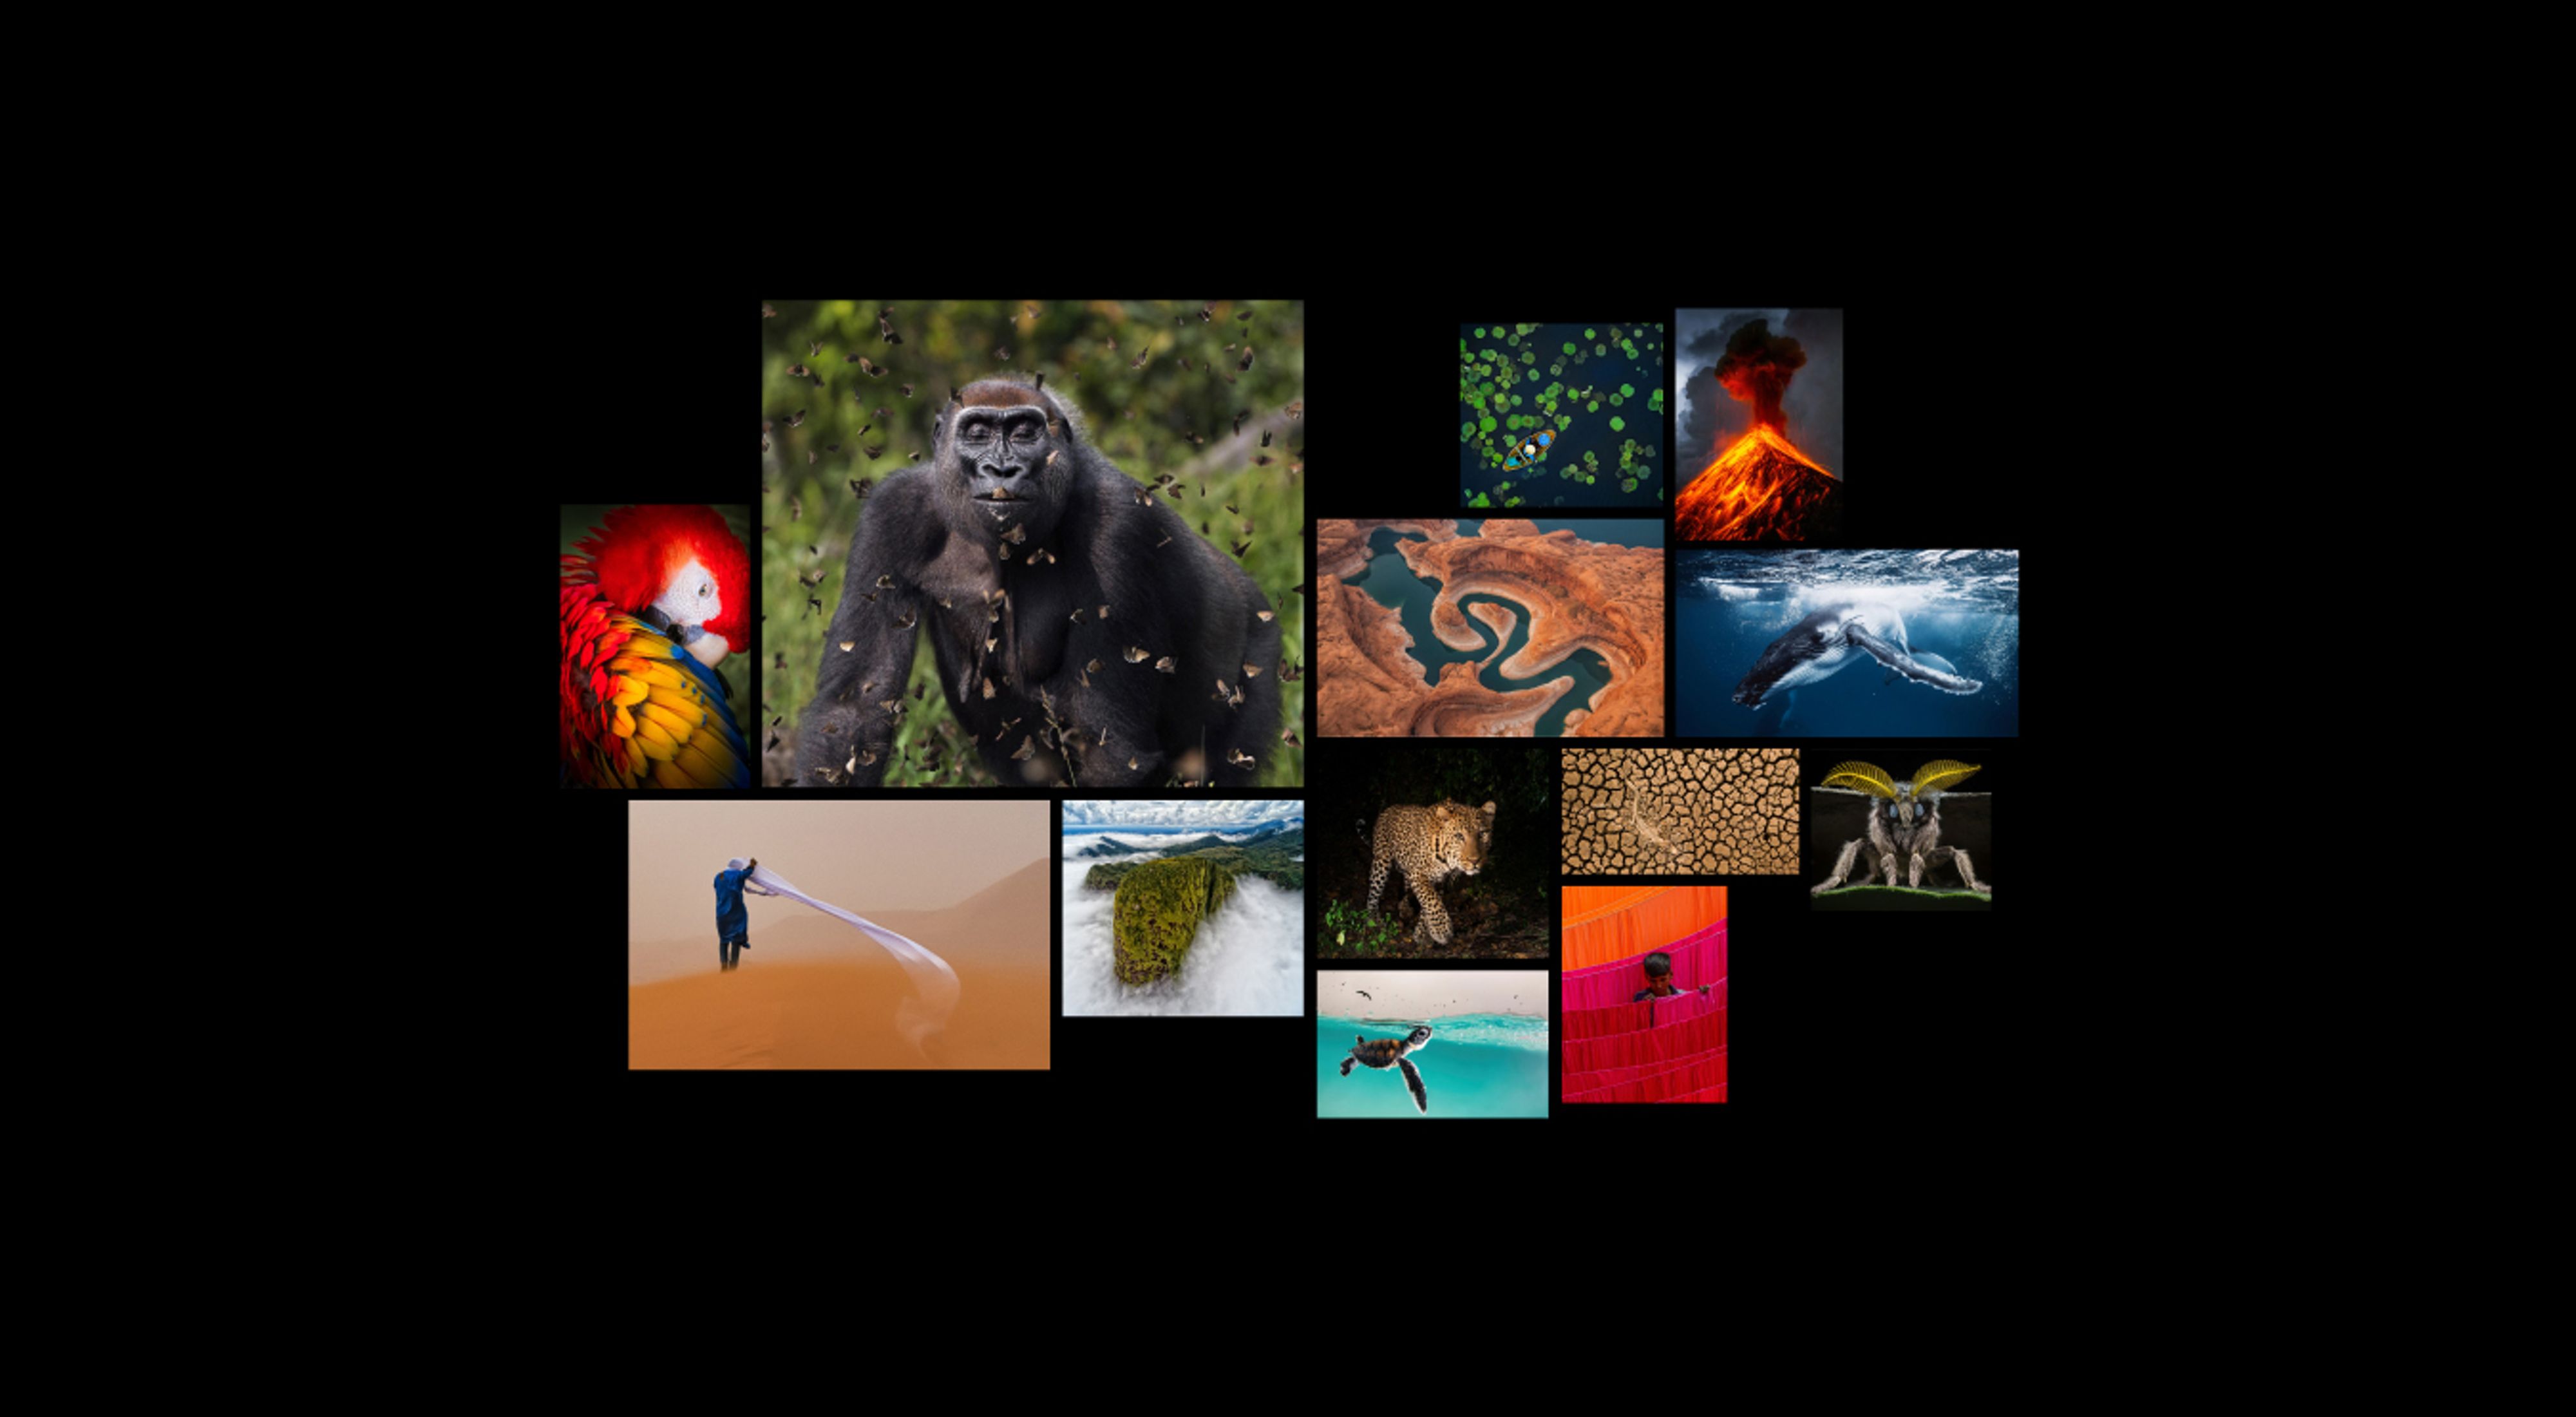 Collage of winning photos from The Nature Conservancy's 2021 Global Photo Contest.